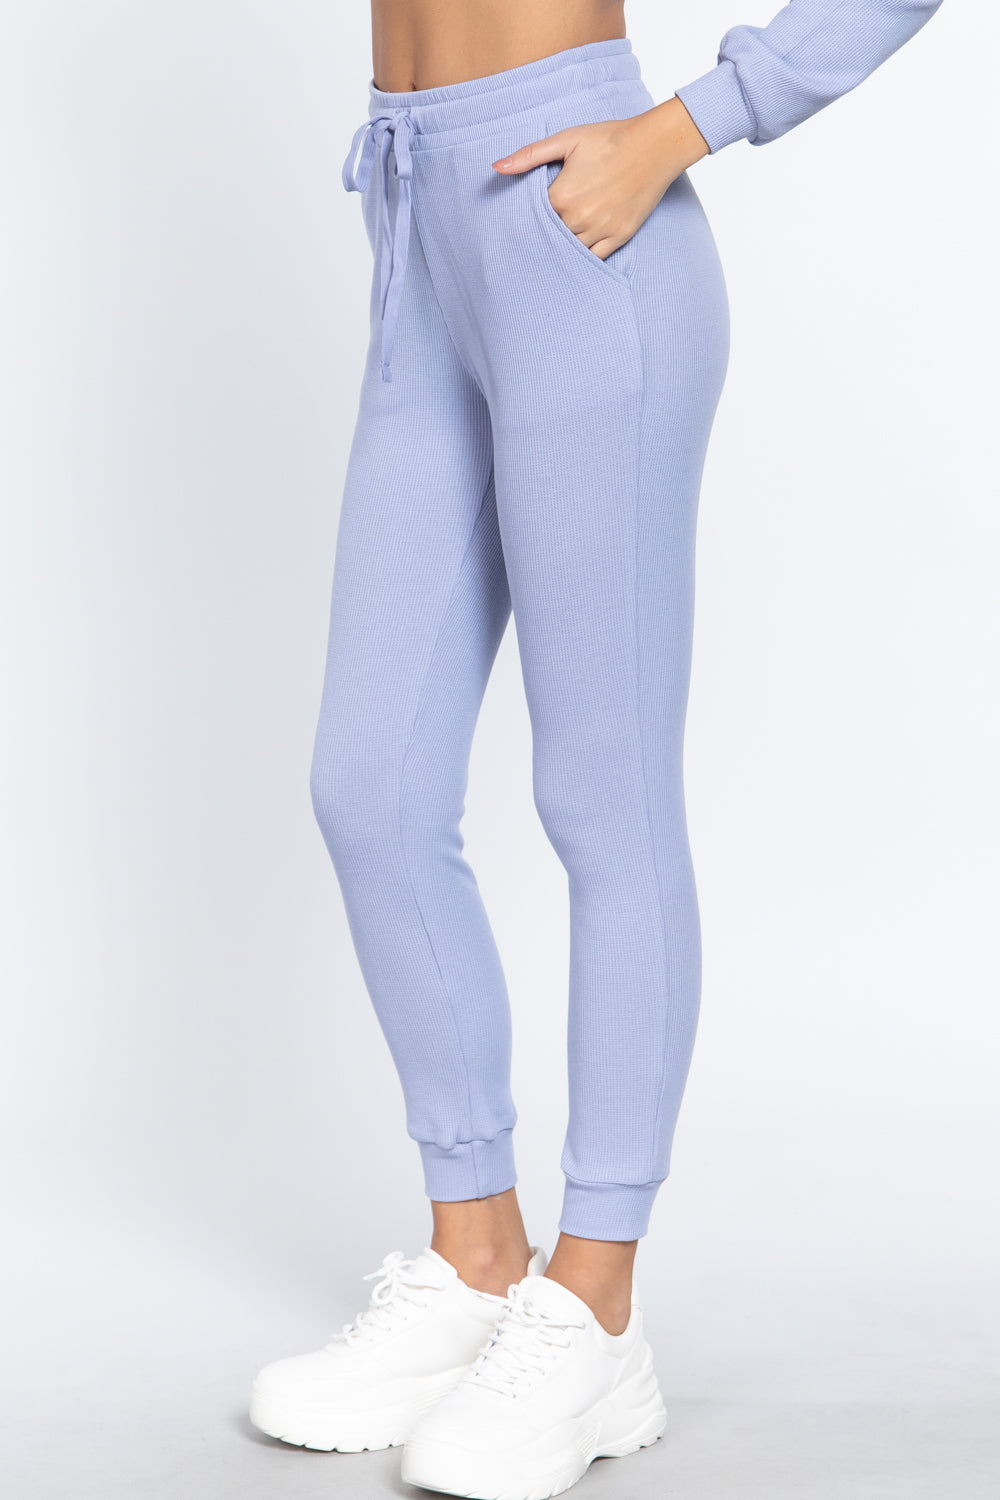 Waistband Side Pocket Thermal Women's Pants